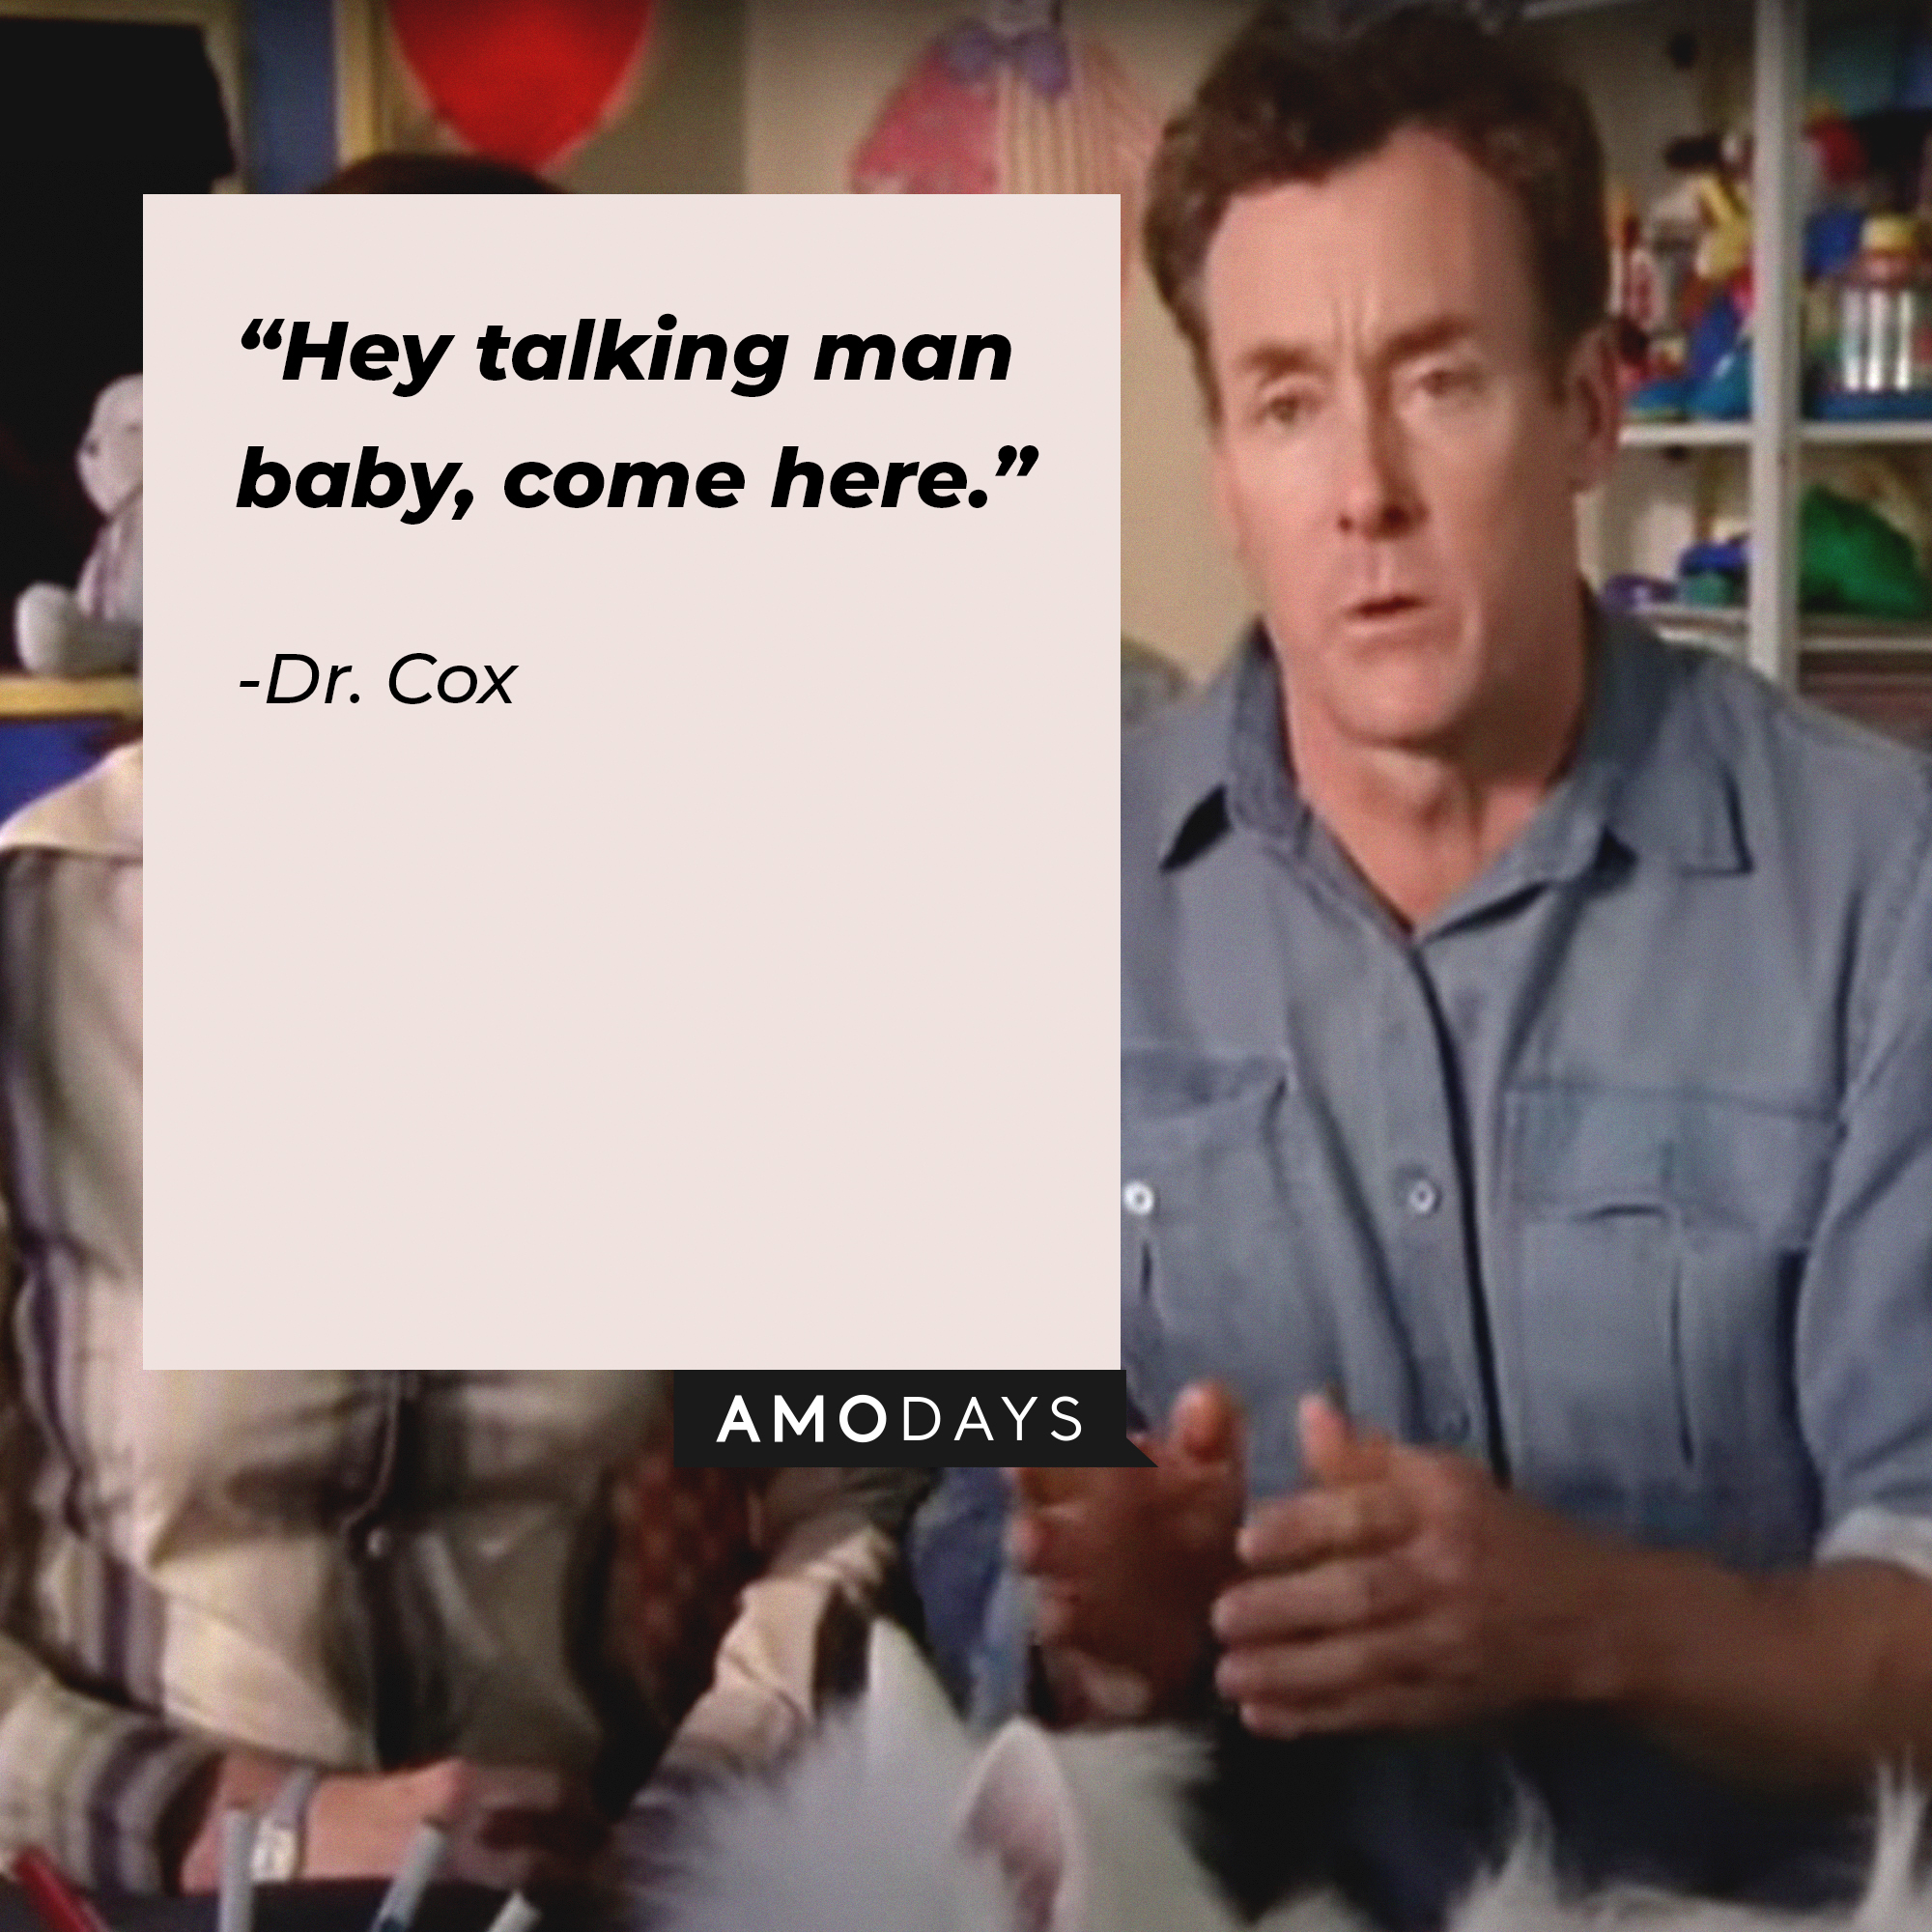 Dr. Cox, with his quote: “Hey talking man baby, come here.” | Source: facebook.com/scrubs